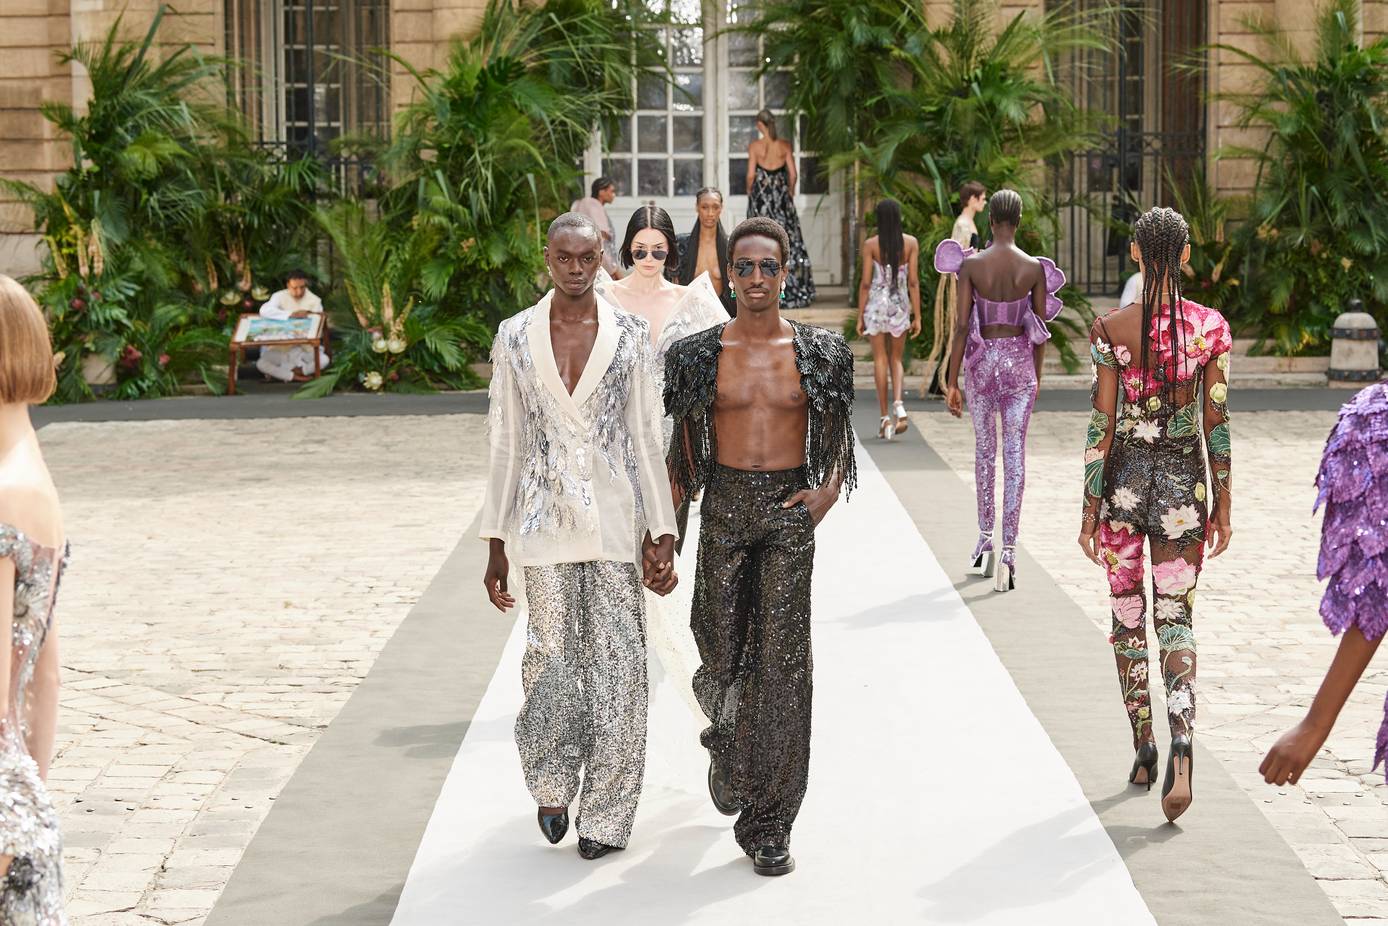 What were the key trends during Haute Couture and Men's Fashion